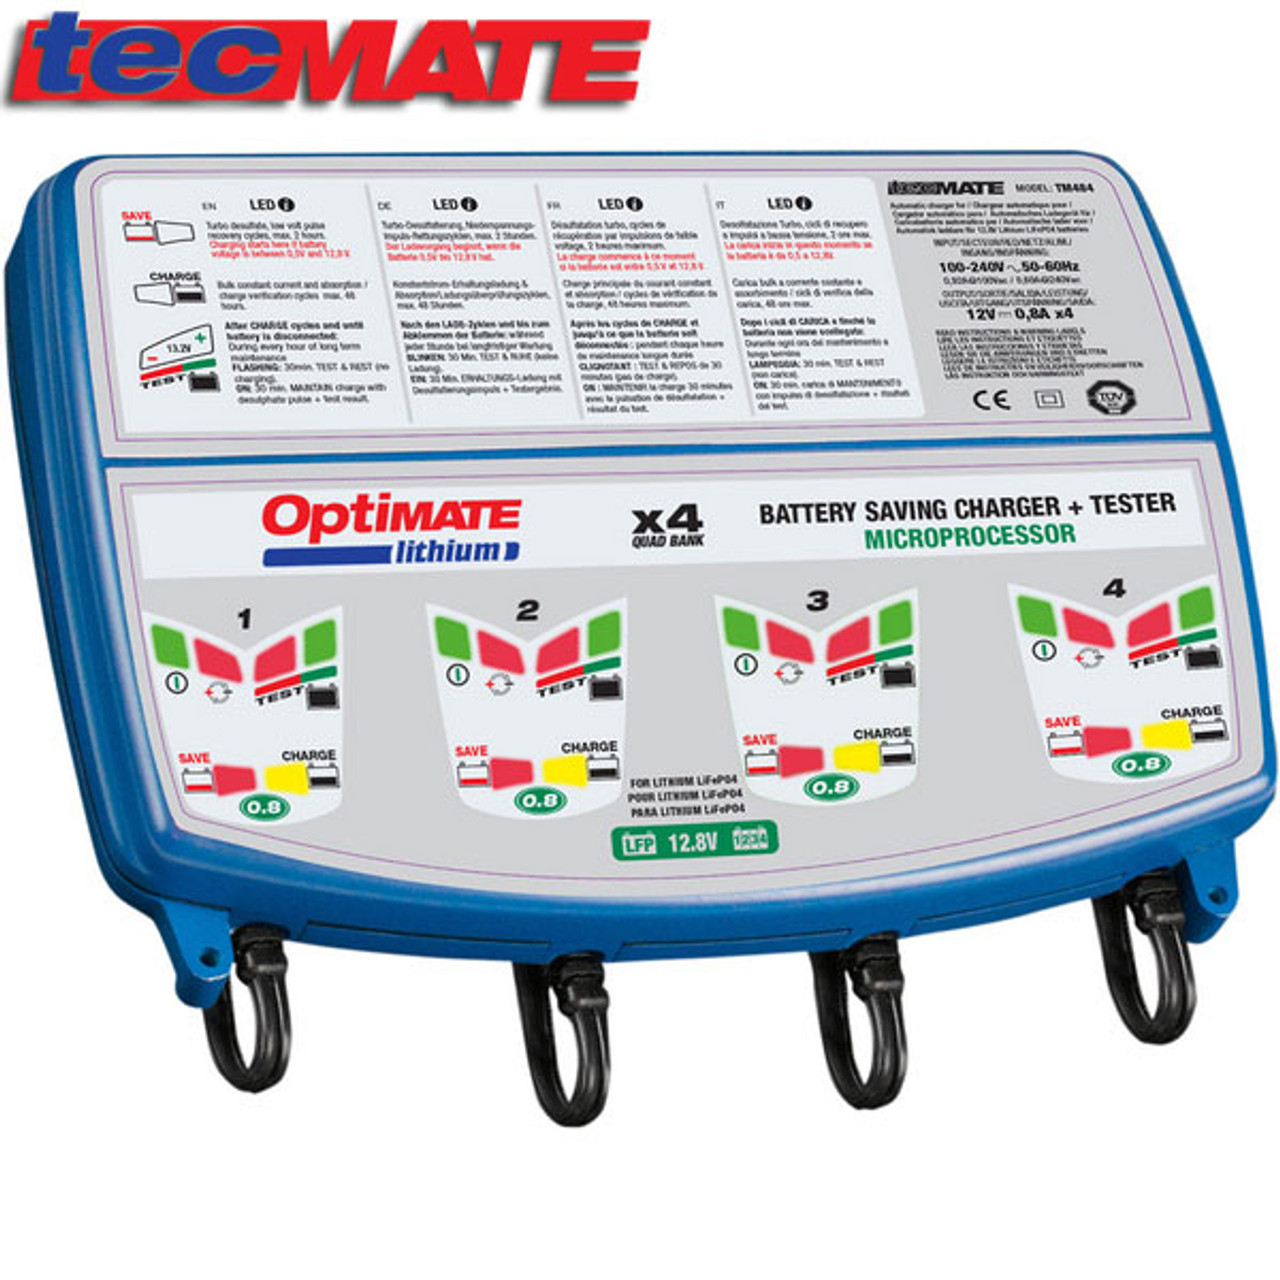 TecMate Charger Optimate 3 X4 - Cycle Gear